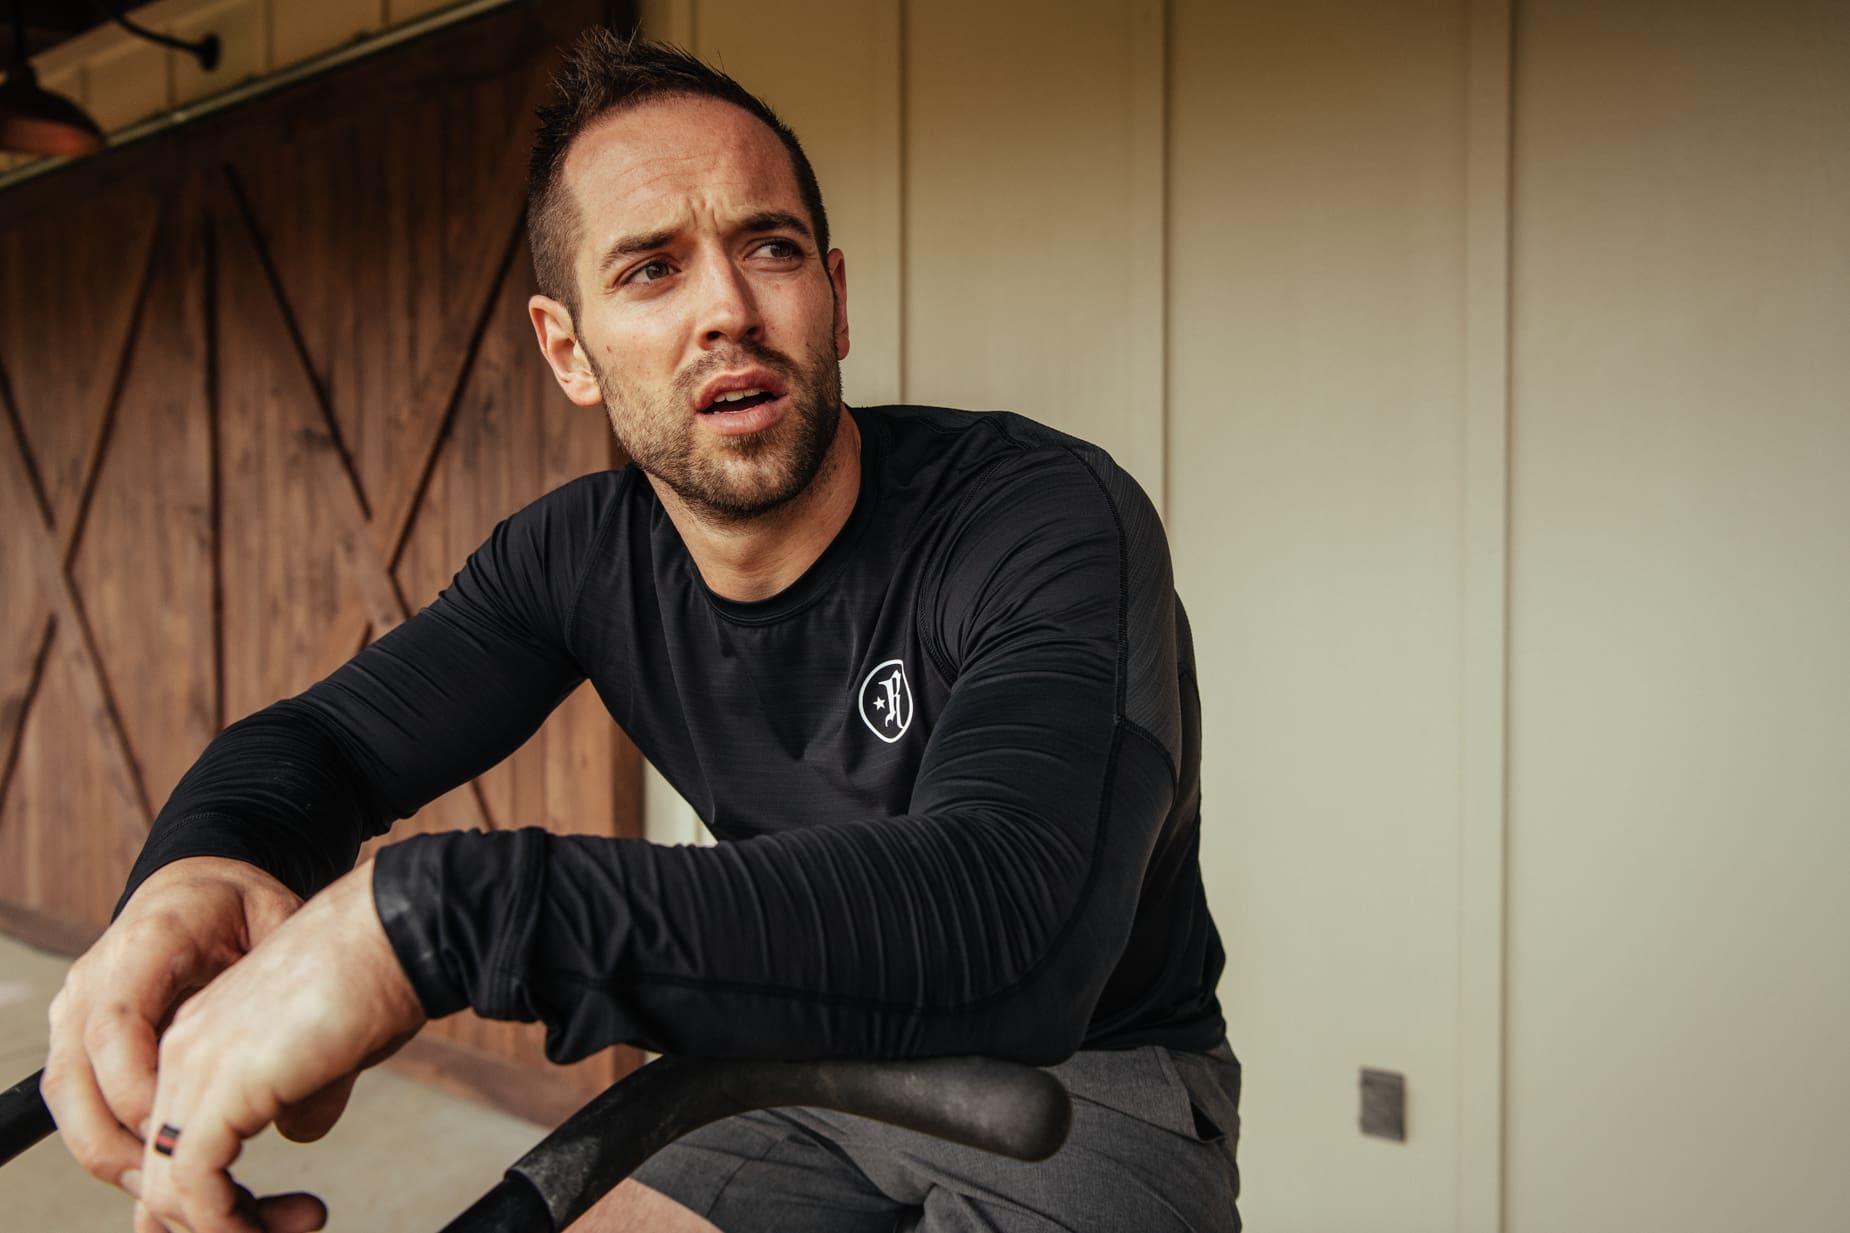 rich froning reebok collection